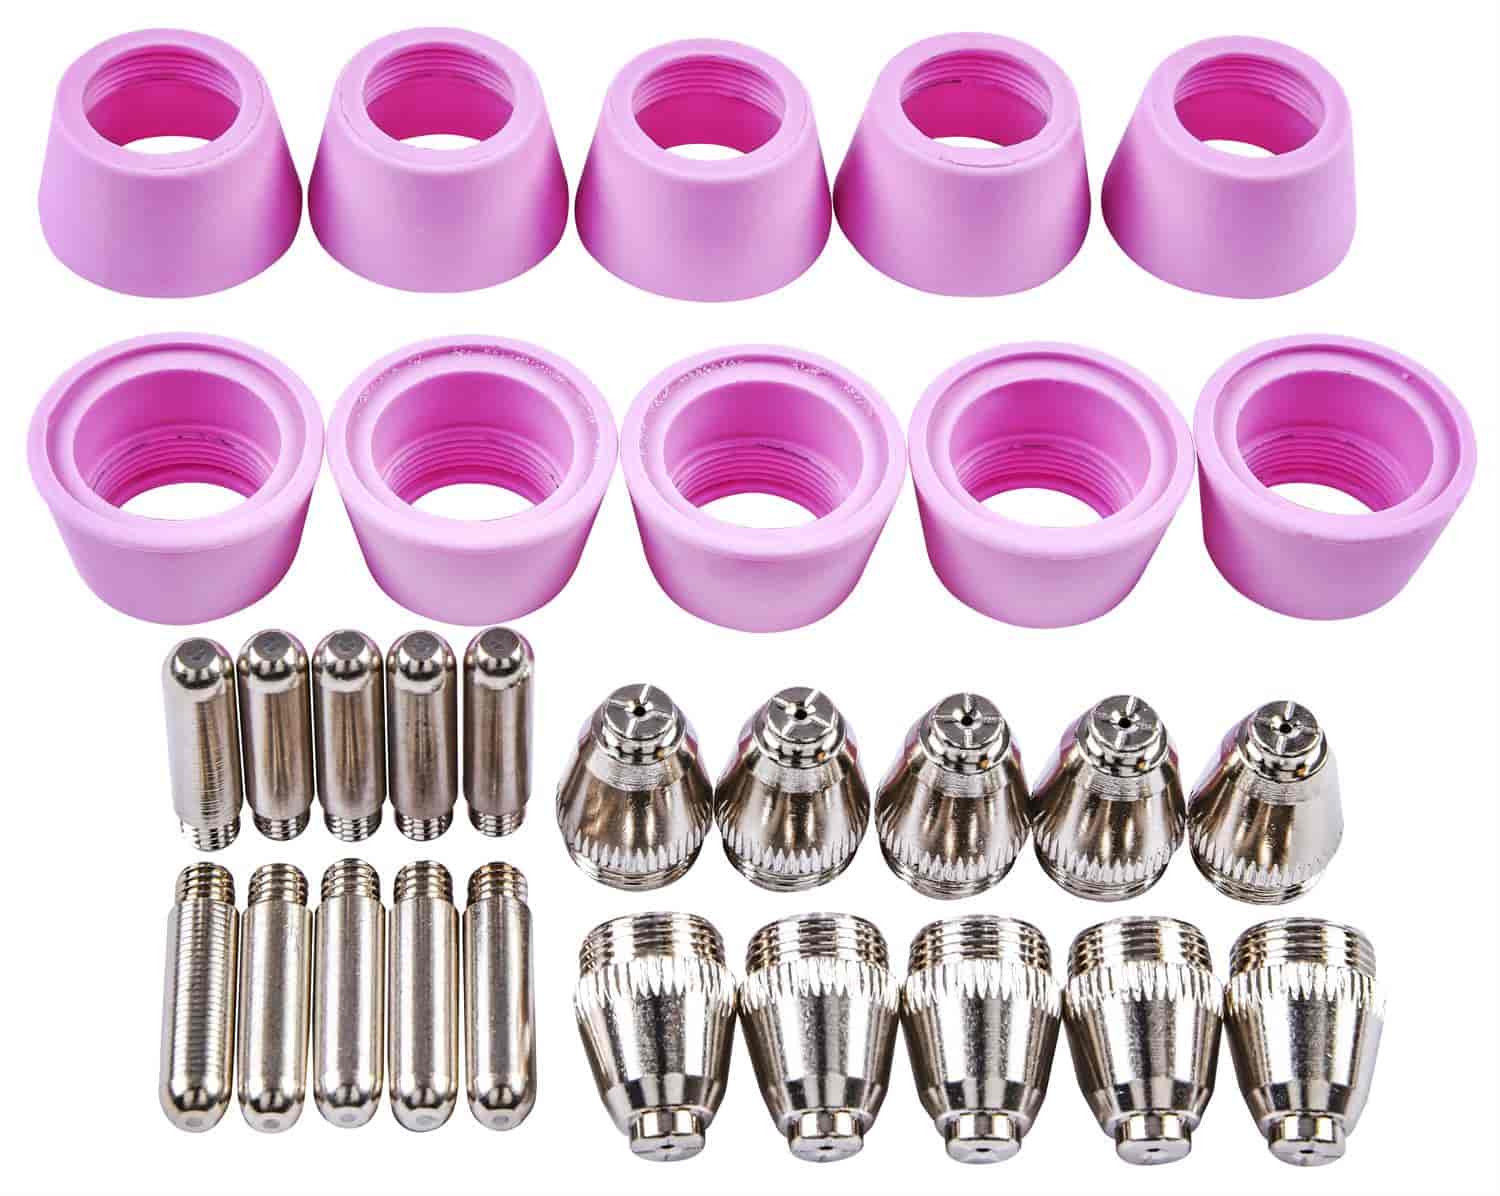 Cut 60 Plasma Cutter Replacement Tips 10 Pack